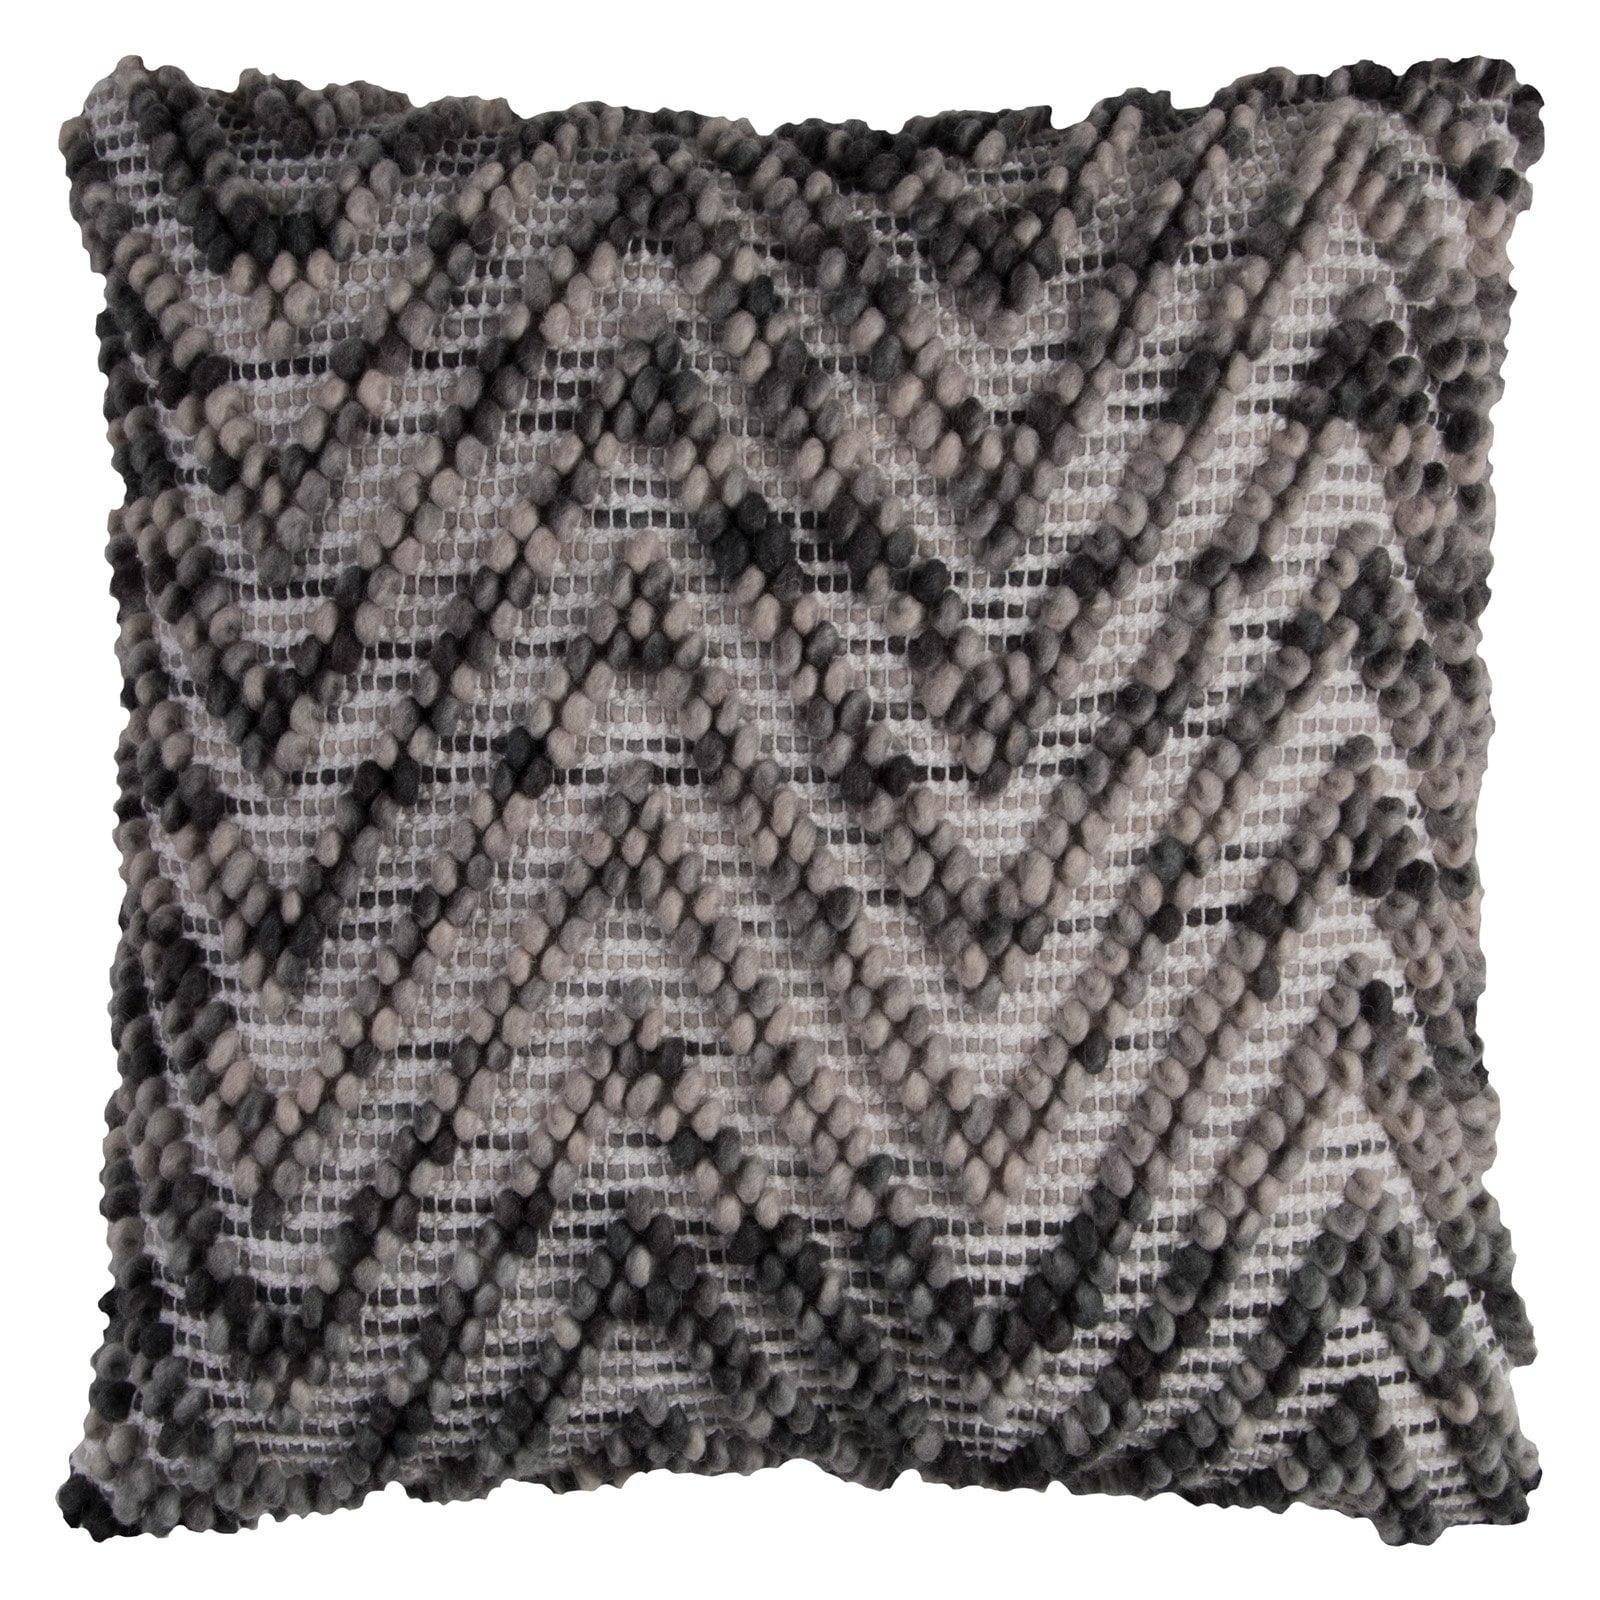 Variegated Chevron 18" Square Cotton Throw Pillow in Gray and Natural